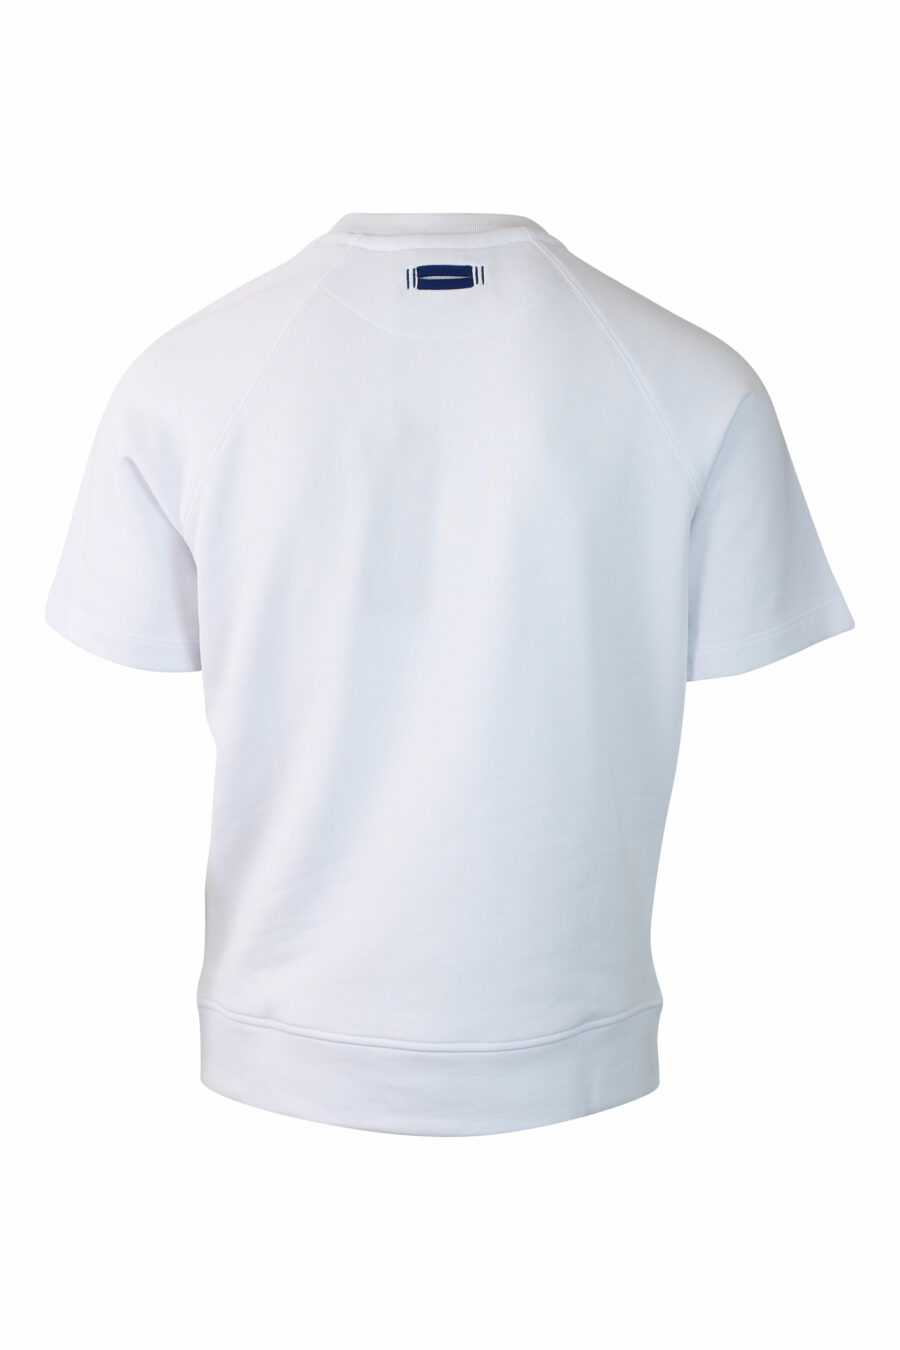 White T-shirt with embroidered monochrome mini-logo shield - IMG 0126